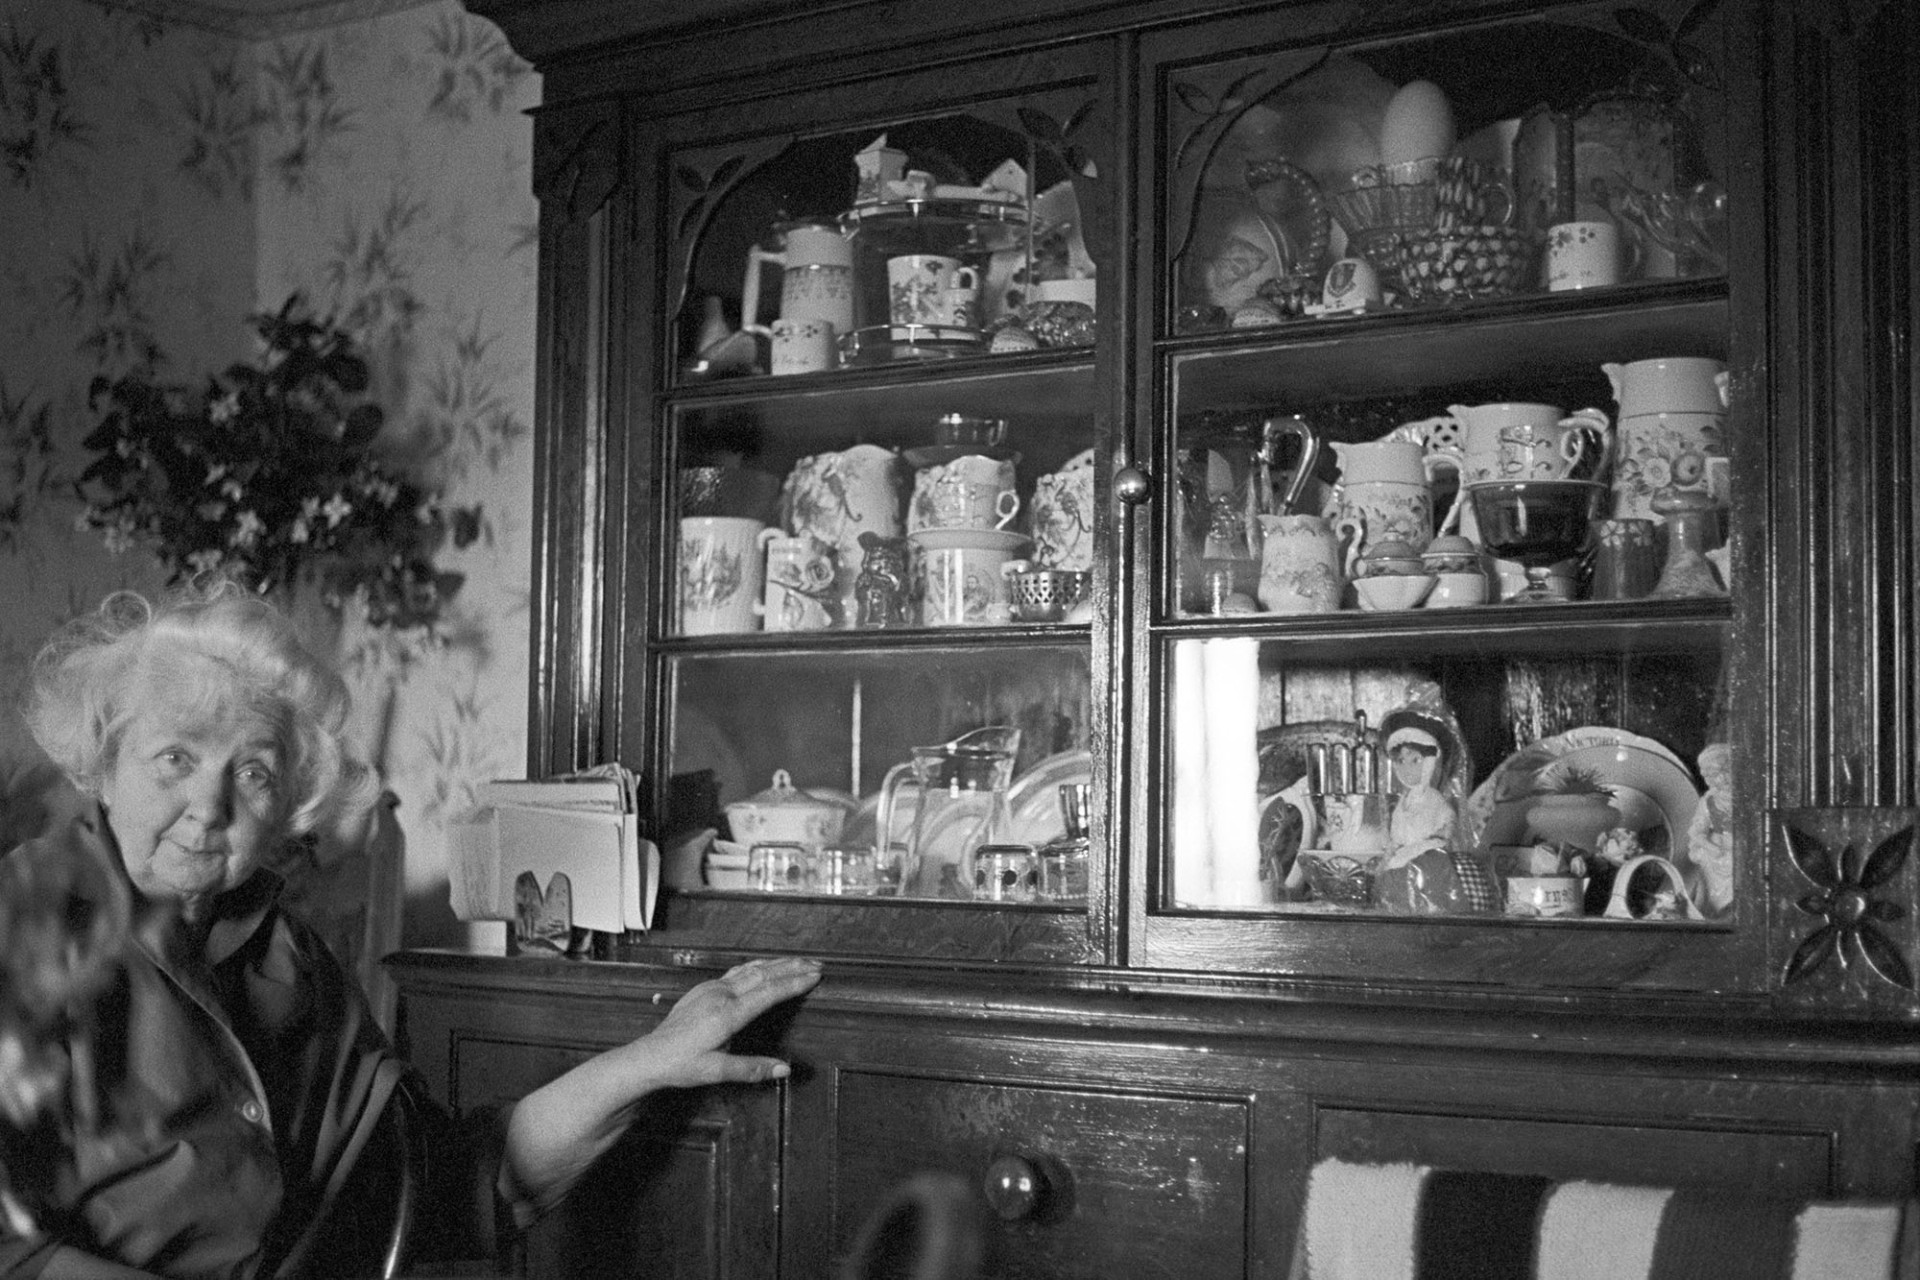 Old woman seated by dresser with china and ornaments.
[Gracie Fursedon at her home in Hatherleigh sat by her dresser with china and ornaments.]